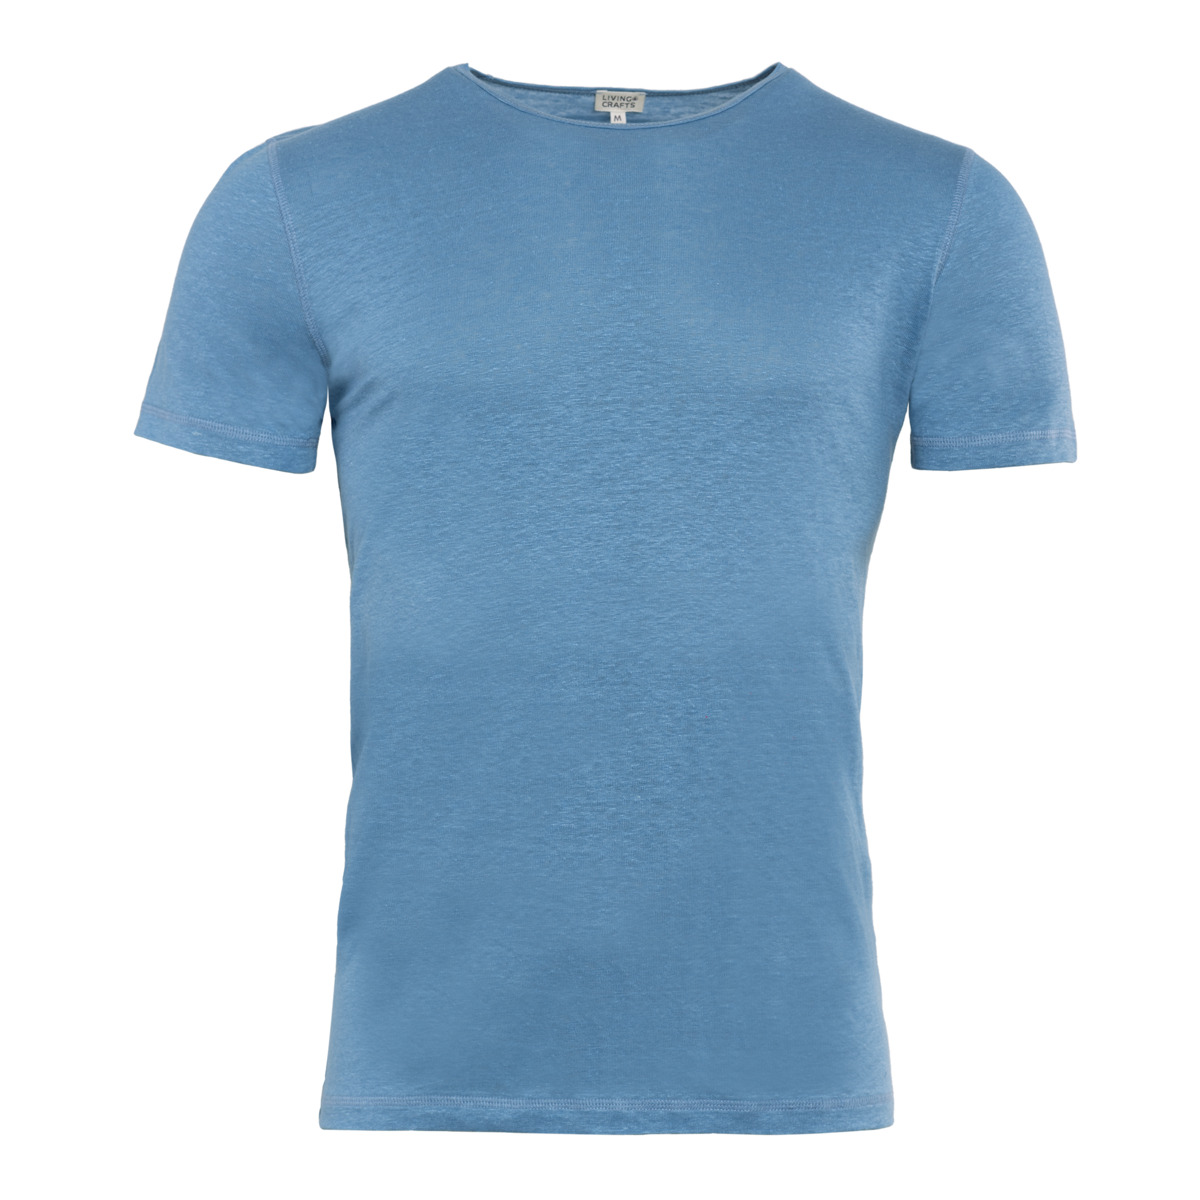 Blue T-shirt, ANDY